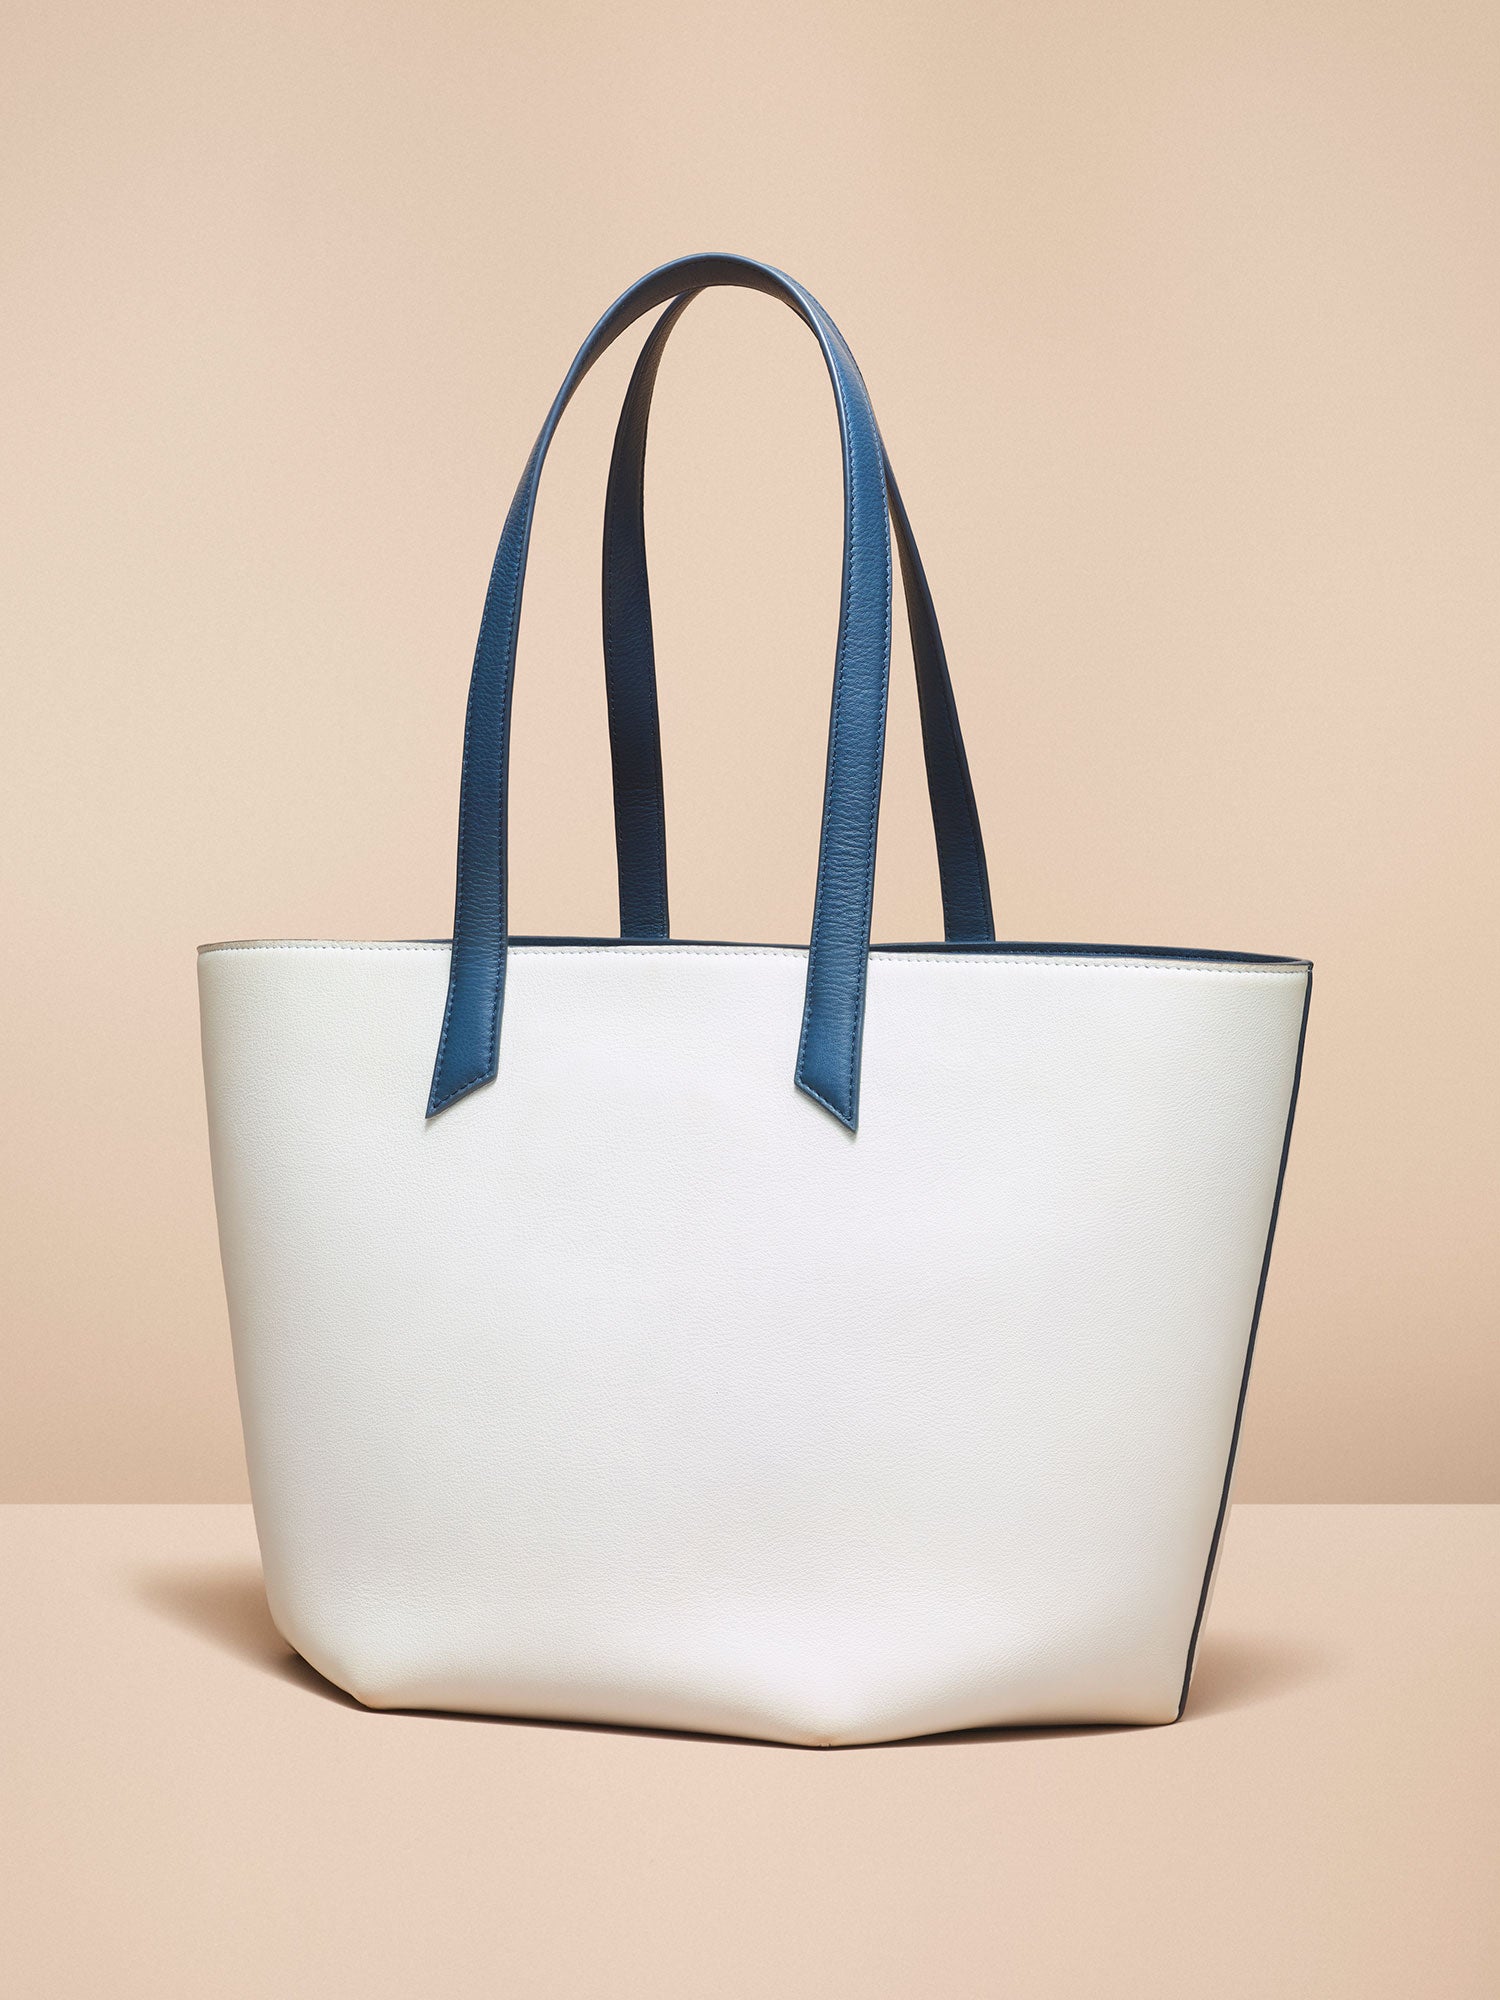 The Expert Carryall Tote